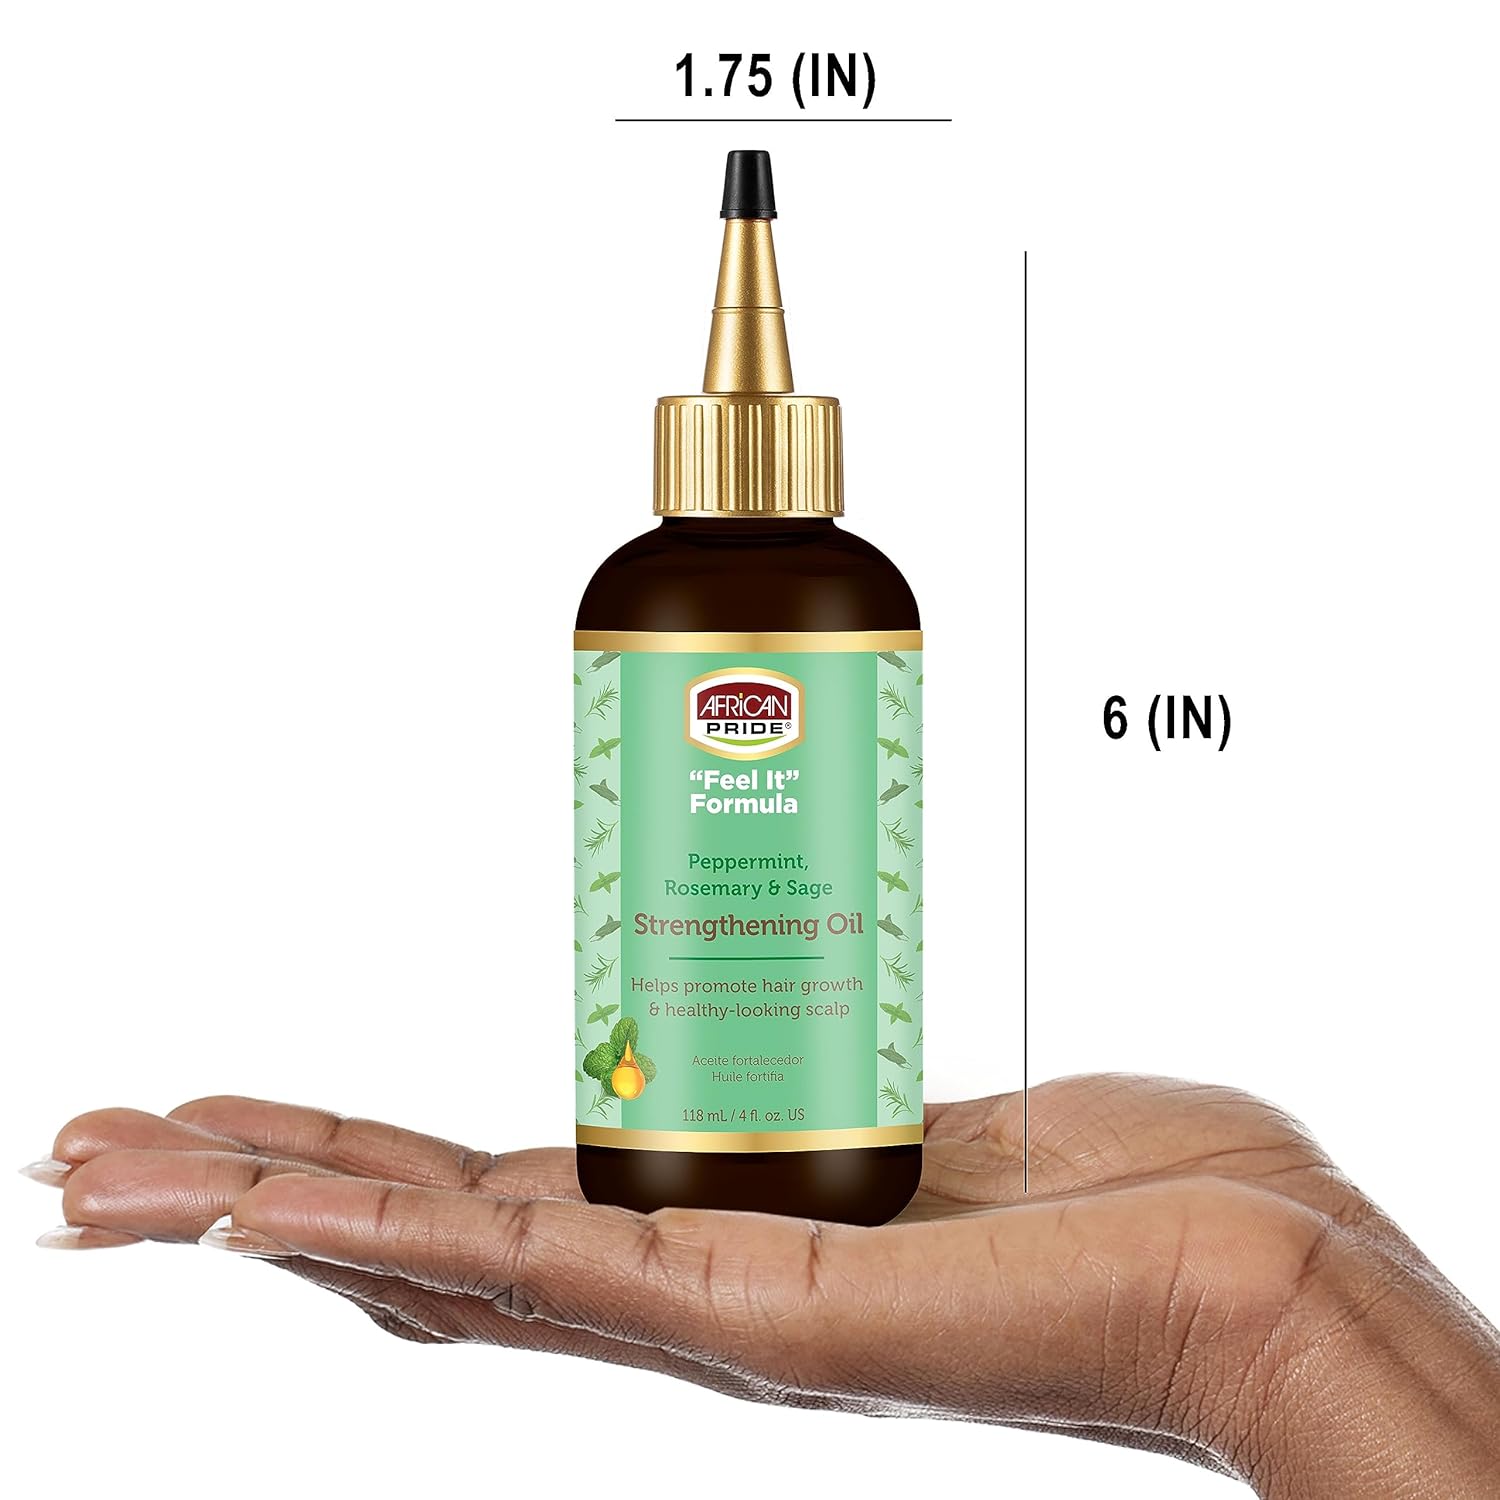  African Pride Feel It Formula, Strengthening Oil with Peppe